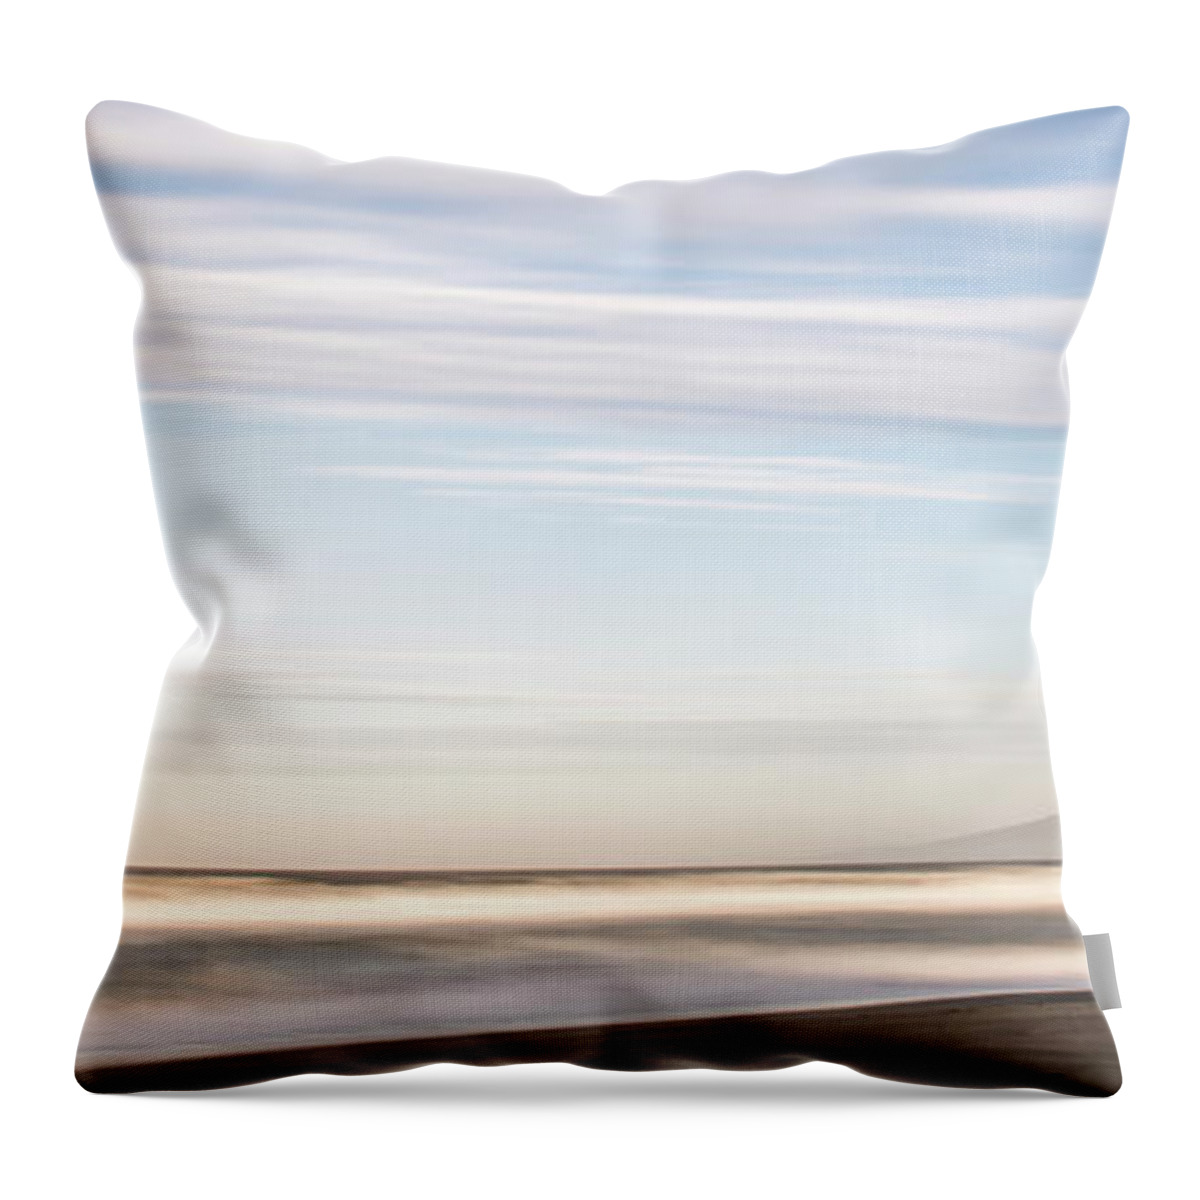 Ship Throw Pillow featuring the photograph Washed Ashore by Jon Glaser